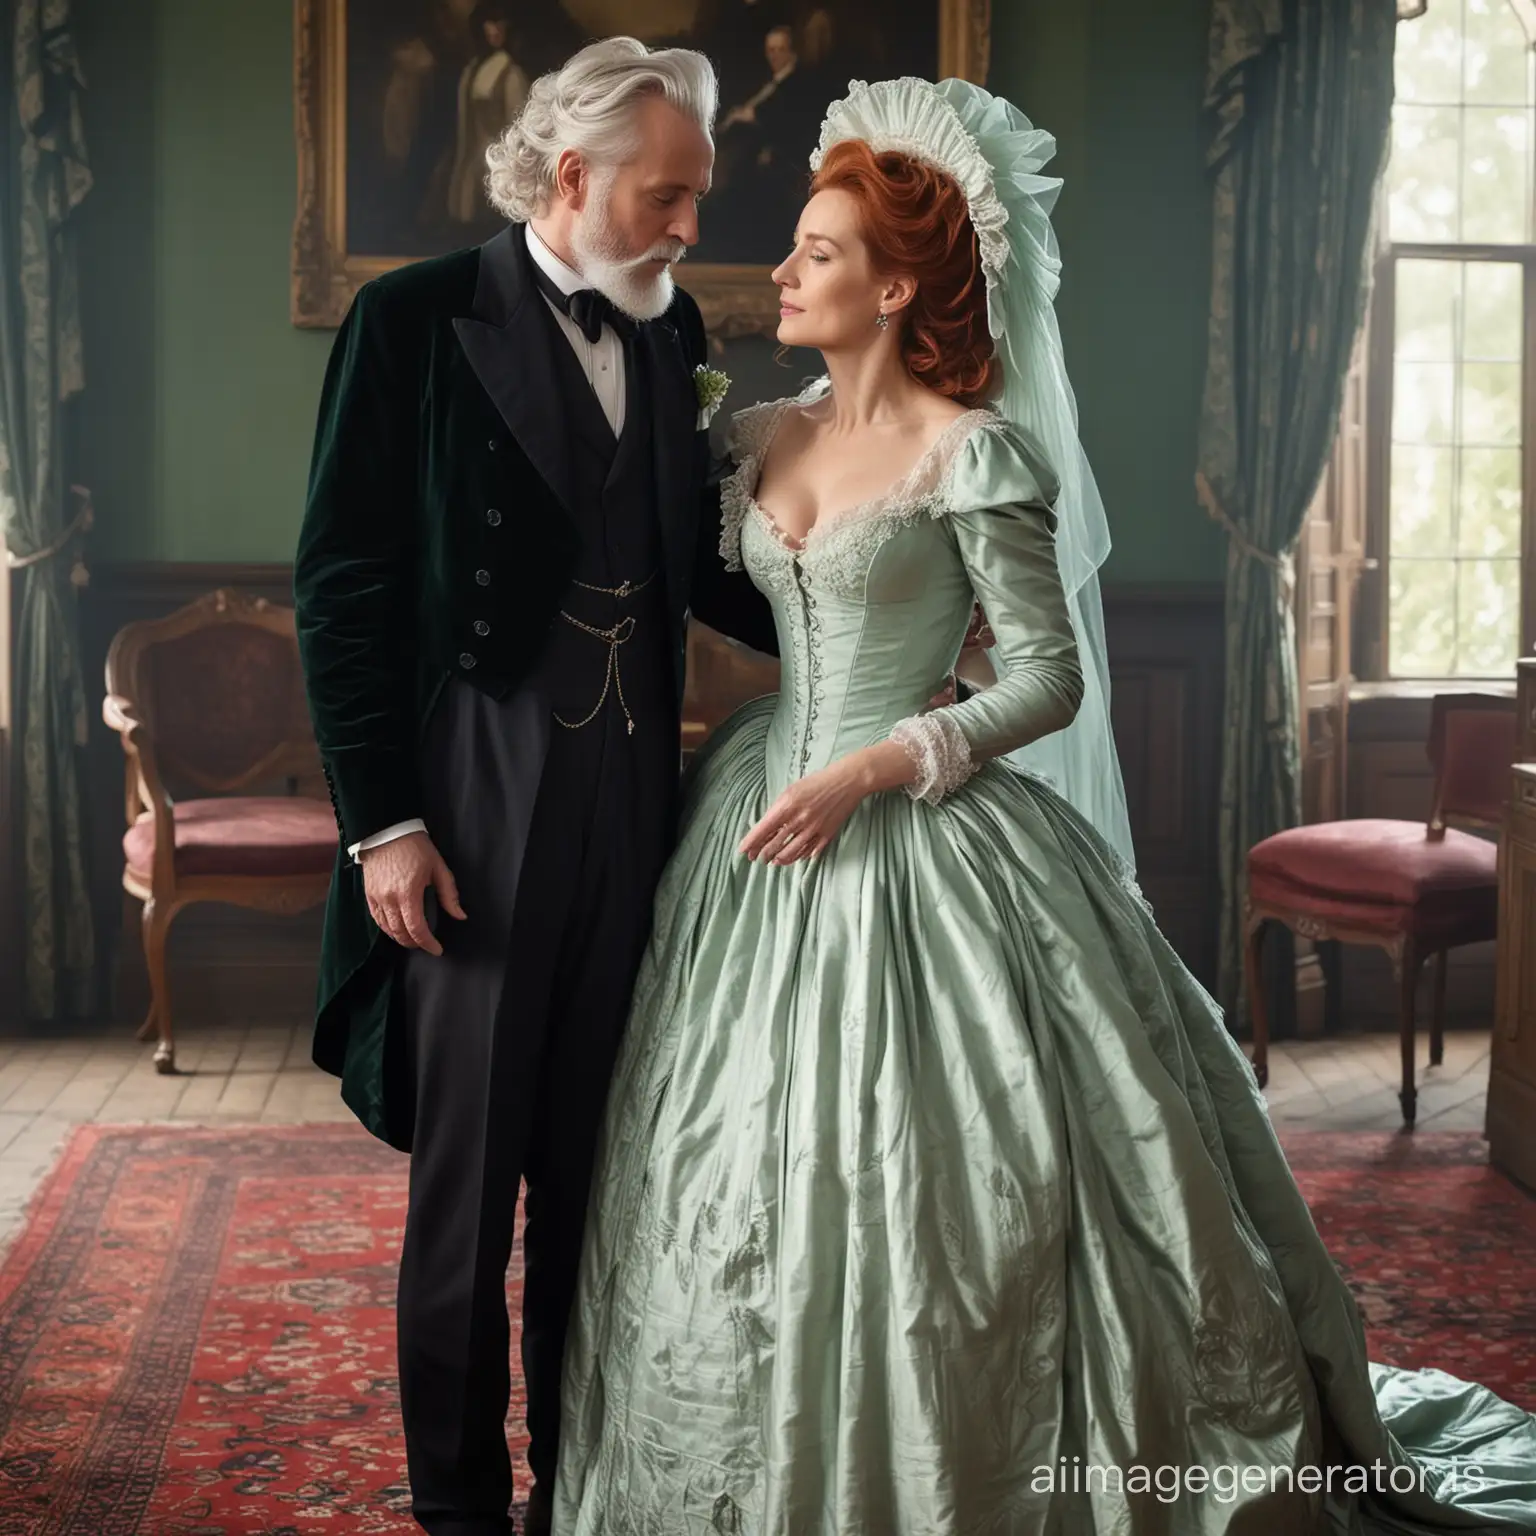 Victorian-Newlyweds-RedHaired-Gillian-Anderson-in-Emerald-Crinoline-Dress-Kissing-Husband